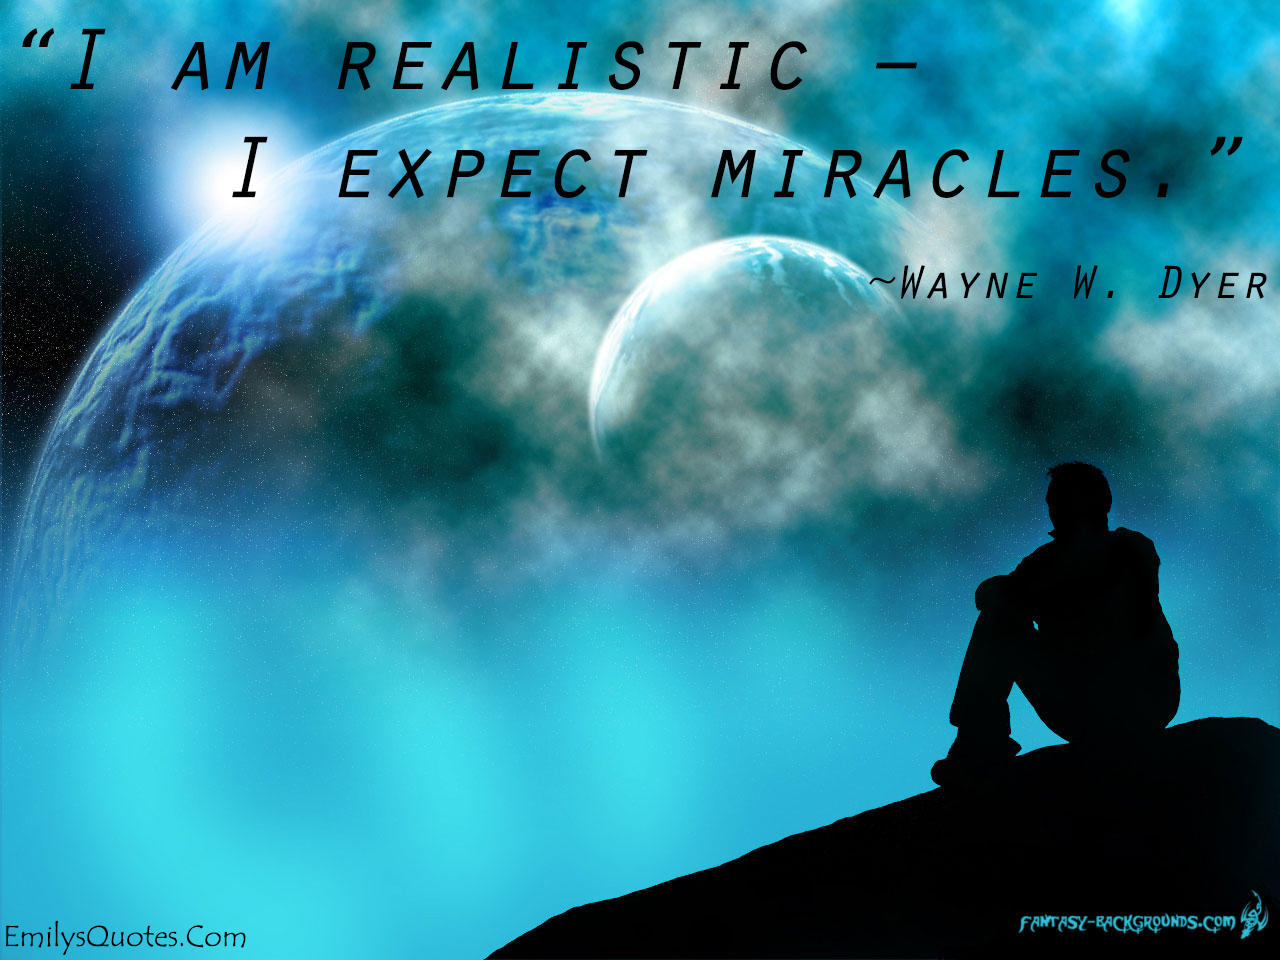 I am realistic – I expect miracles